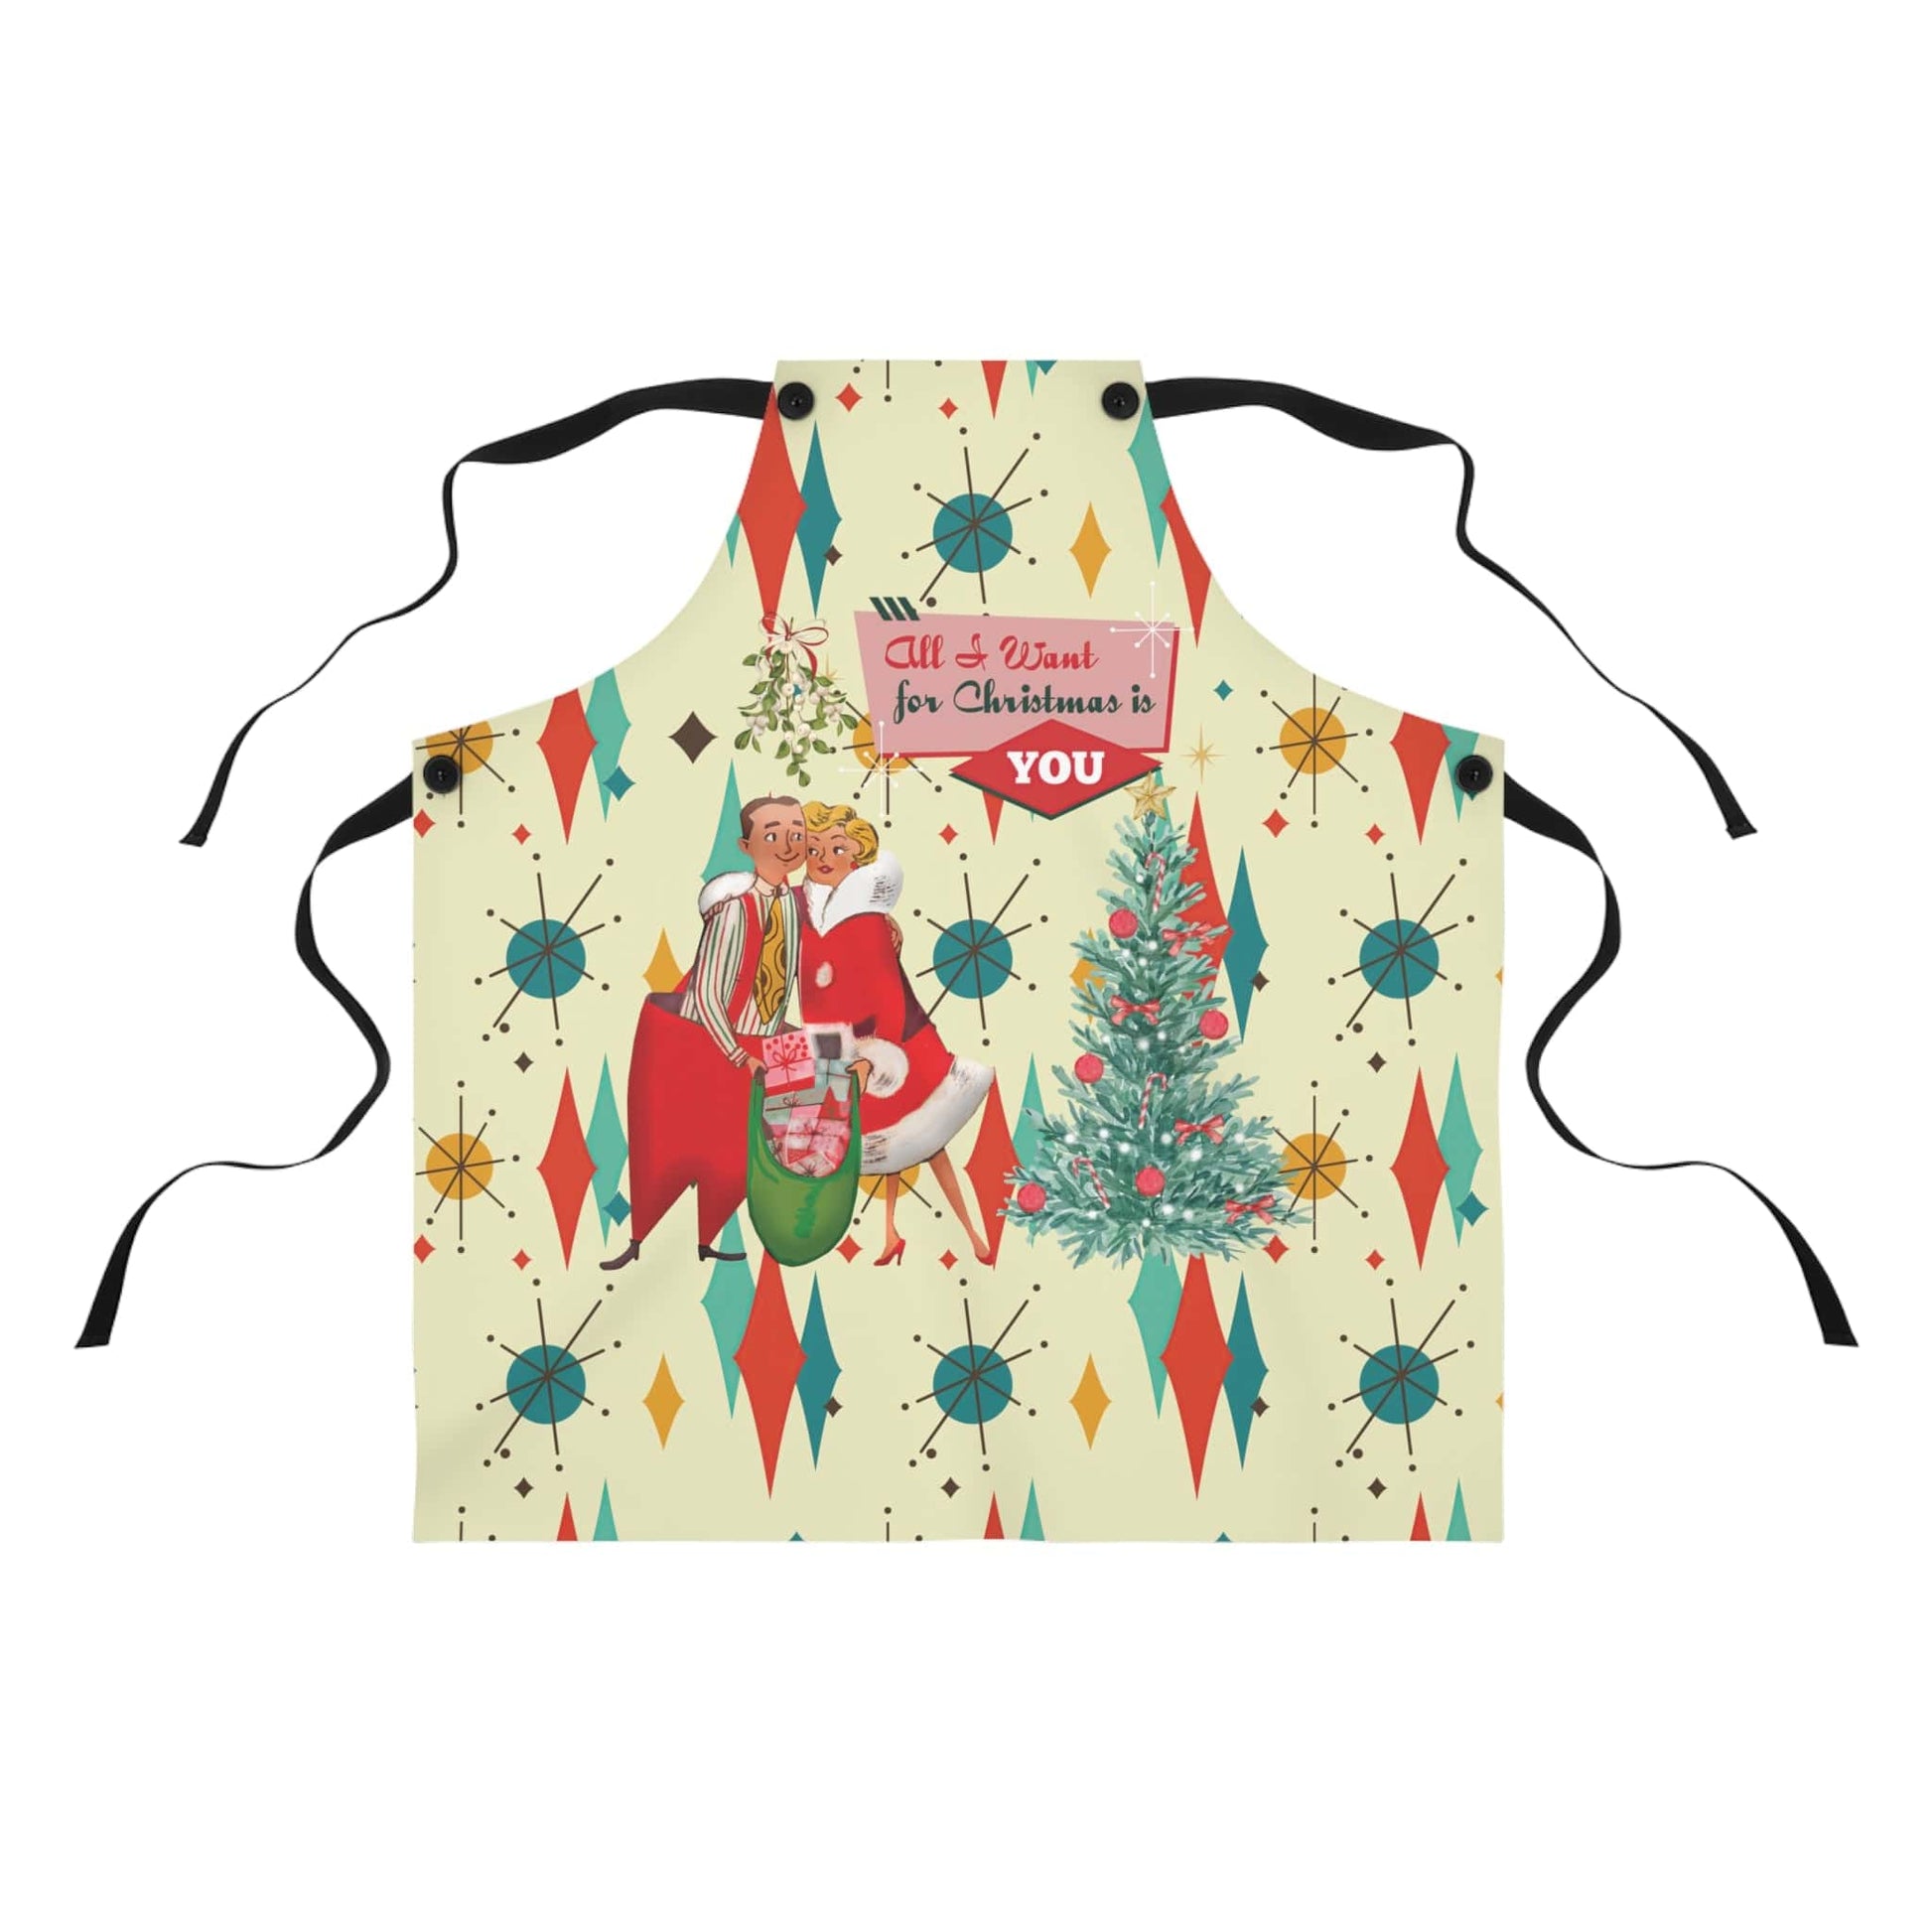 Kate McEnroe New York Retro Vintage 50s Franciscan Diamond Starburst Kitsch Christmas Card Art Apron, Mid Century Modern Holiday Cooking Wear, Chef Gifts Aprons One Size 28246122449252259273